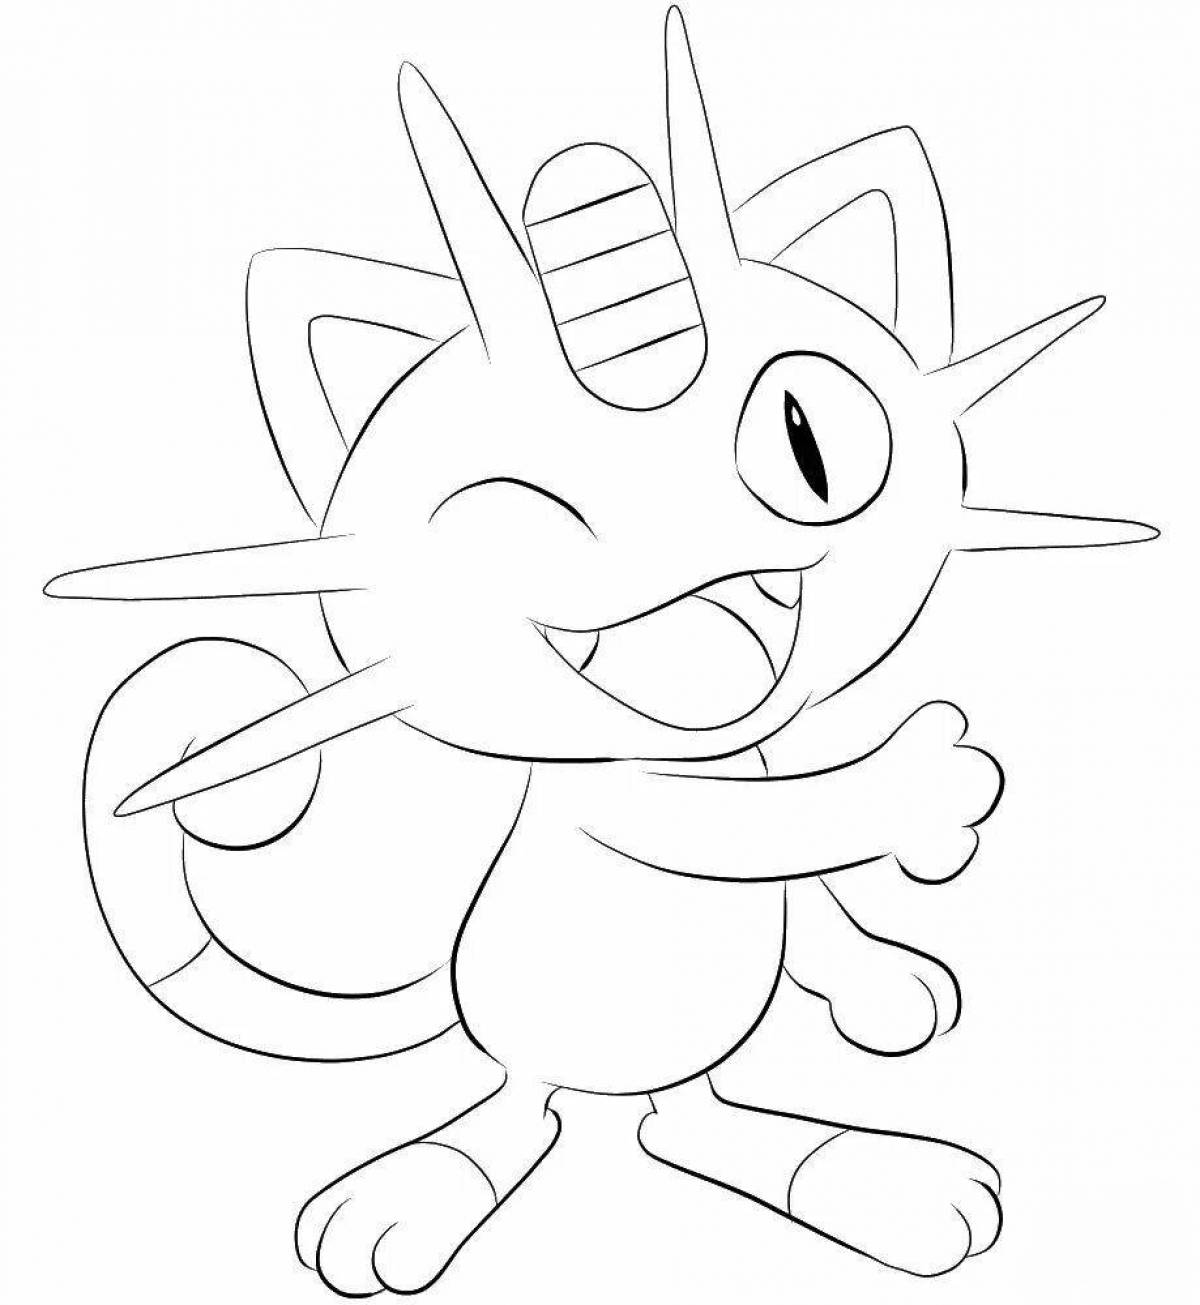 Meowth bright coloring